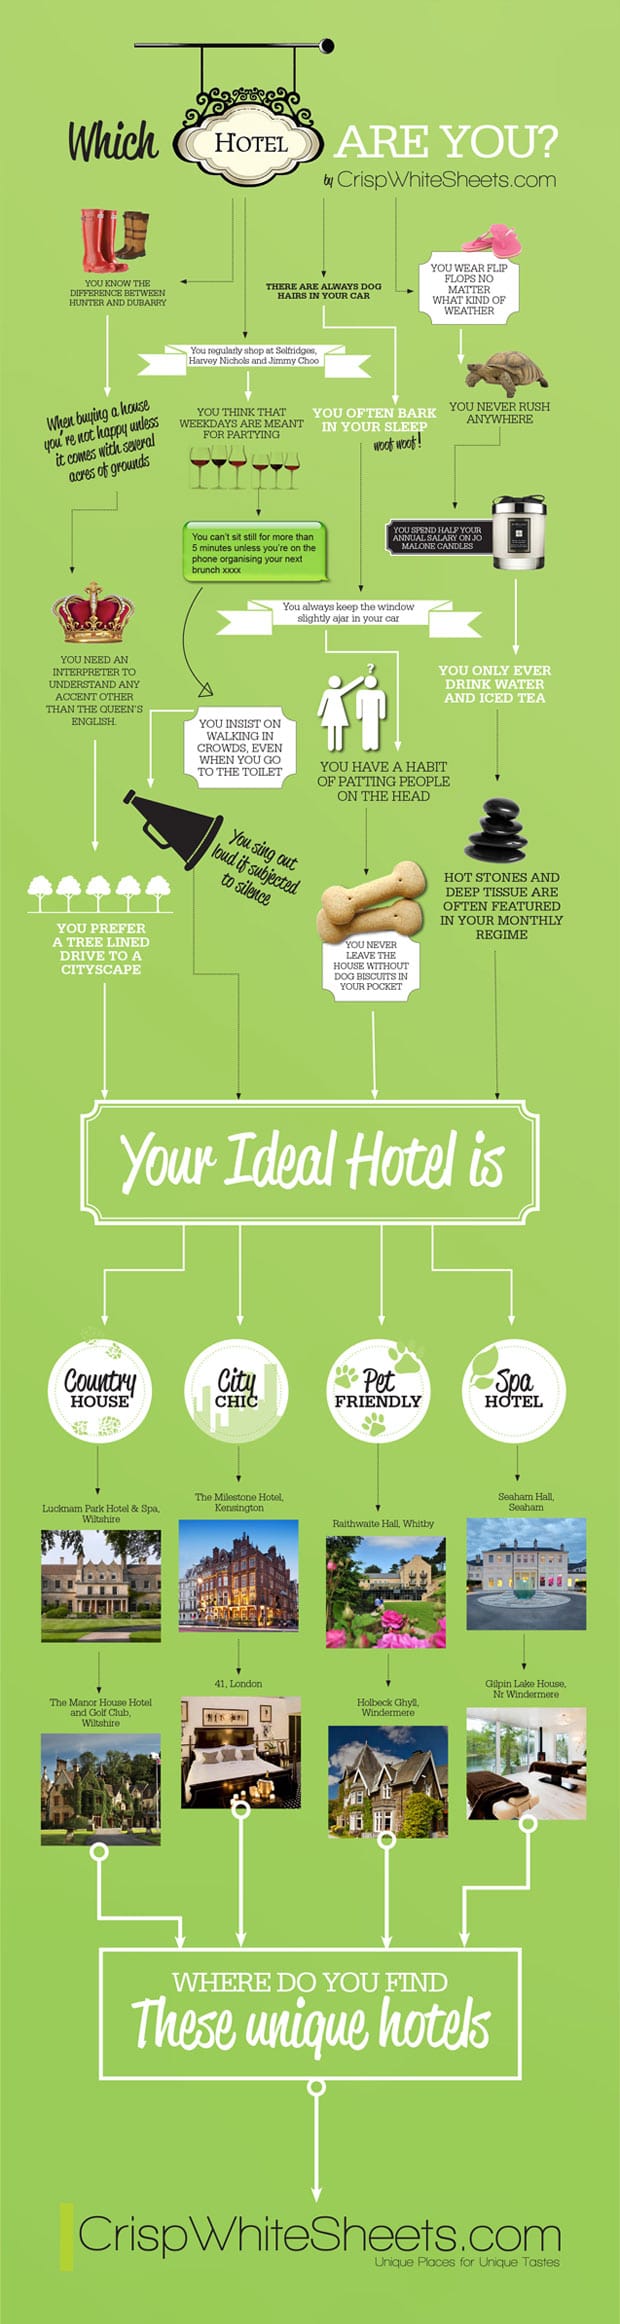 Which Hotel Are You?